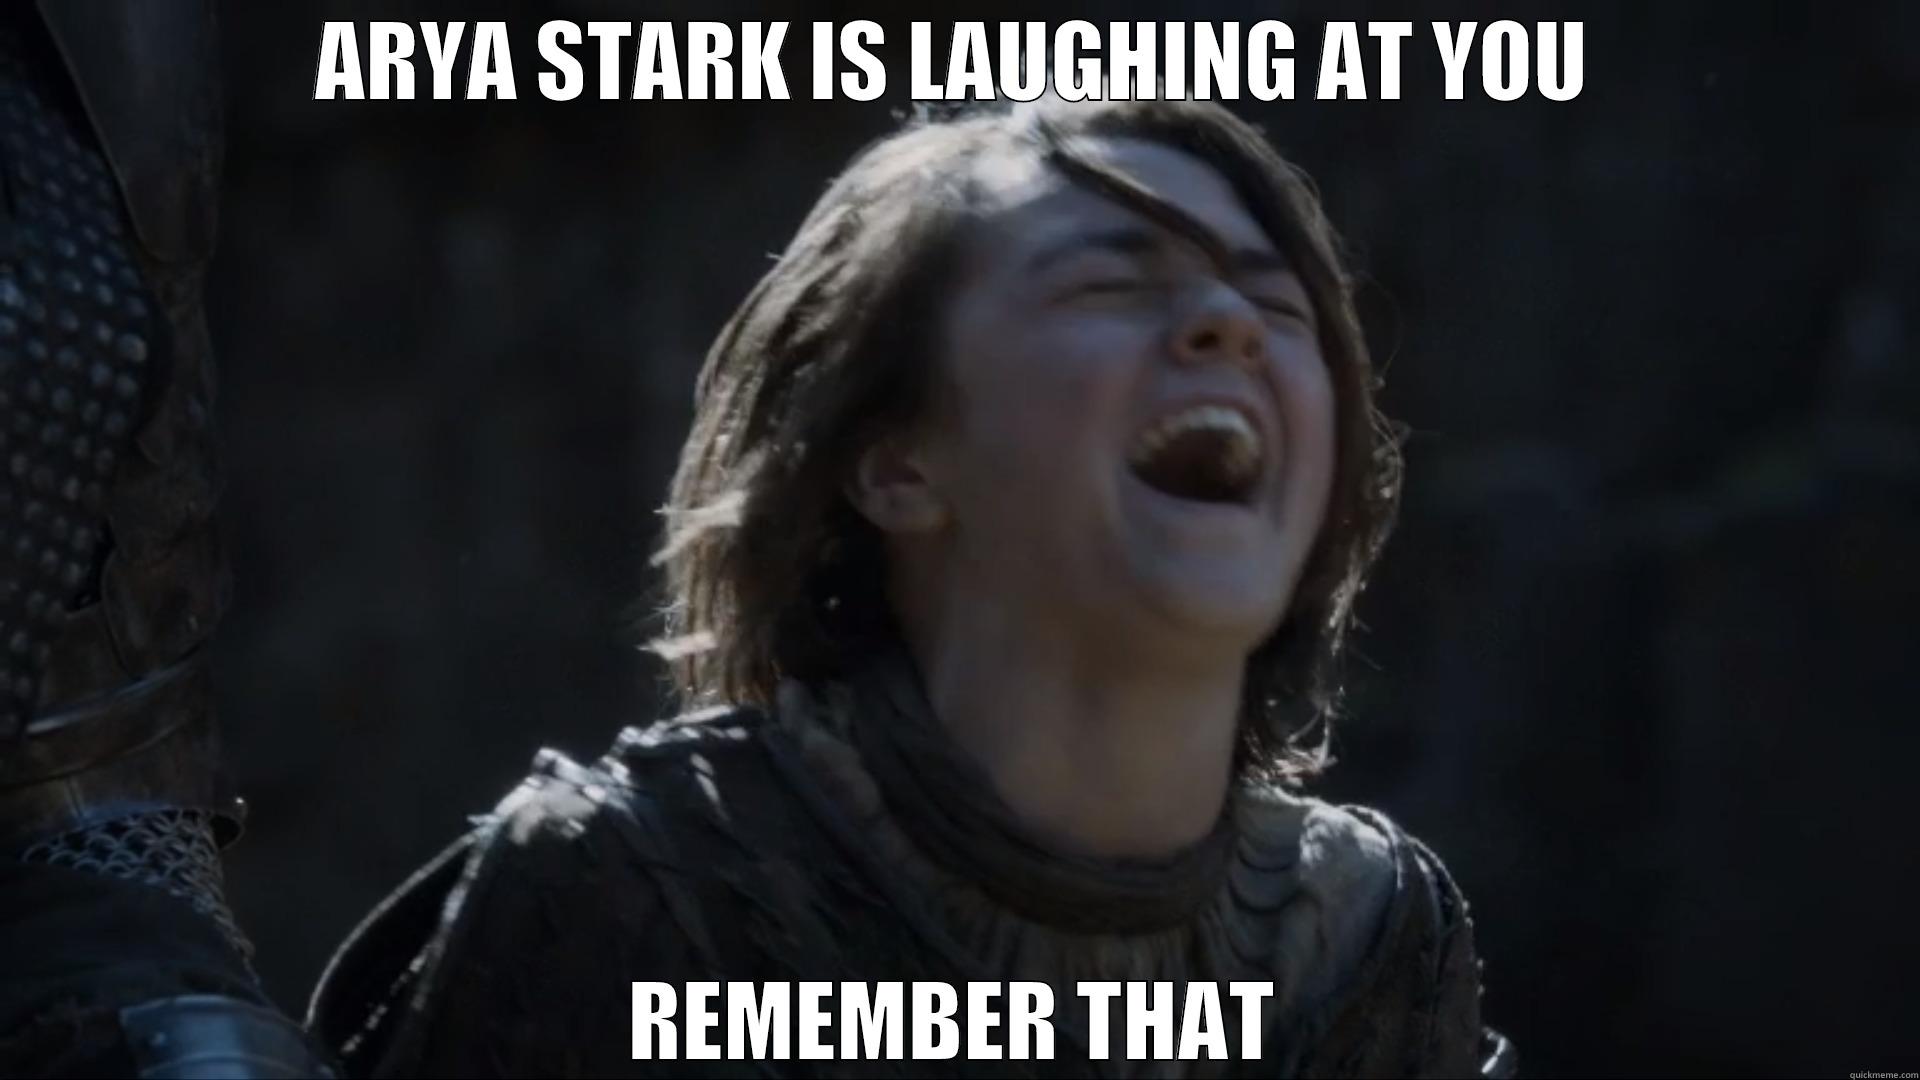 Arya is laughing at you - ARYA STARK IS LAUGHING AT YOU REMEMBER THAT Misc